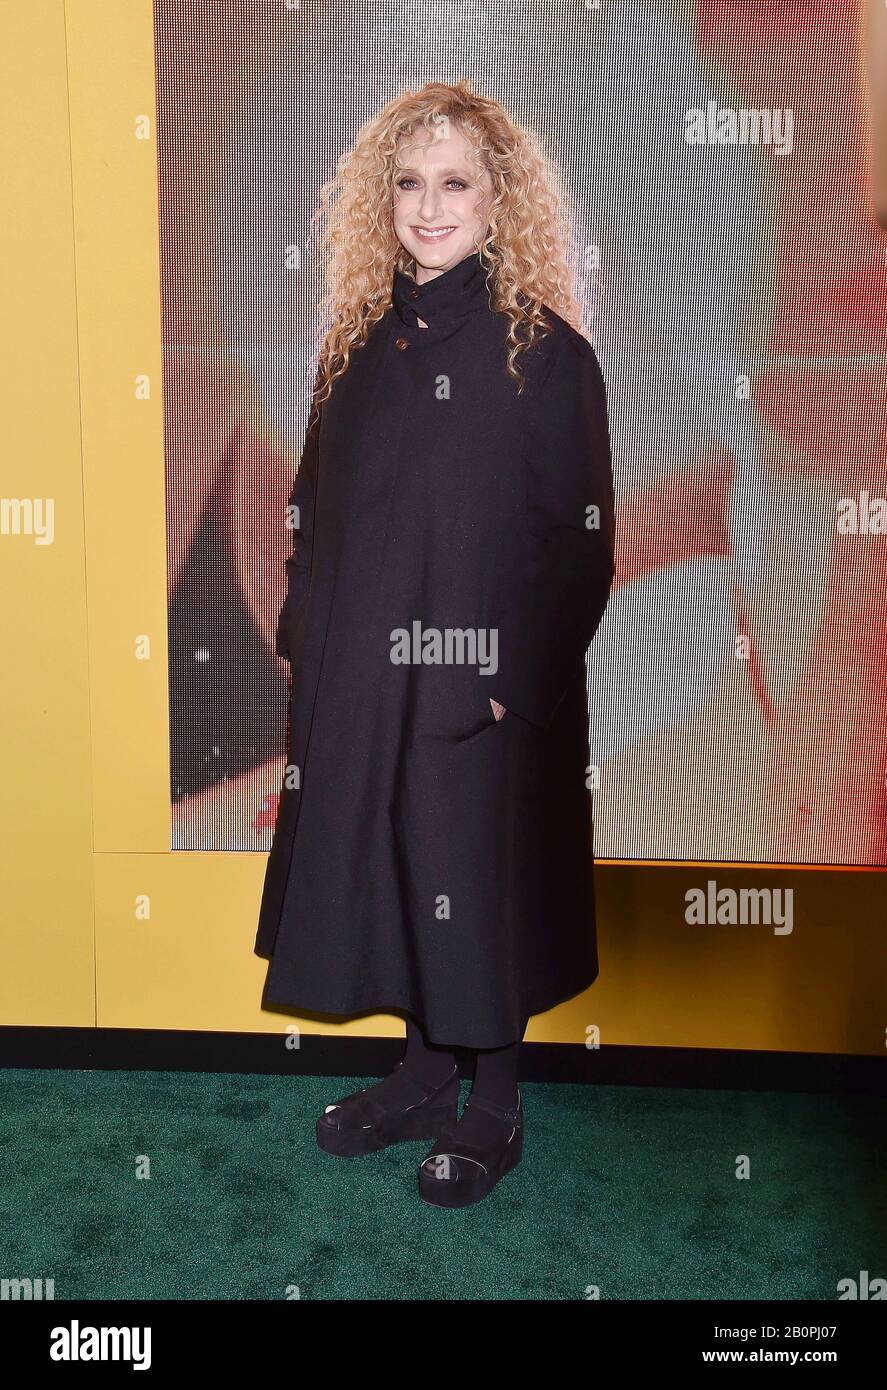 LOS ANGELES, CA - FEBRUARY 19: Carol Kane attends the premiere of